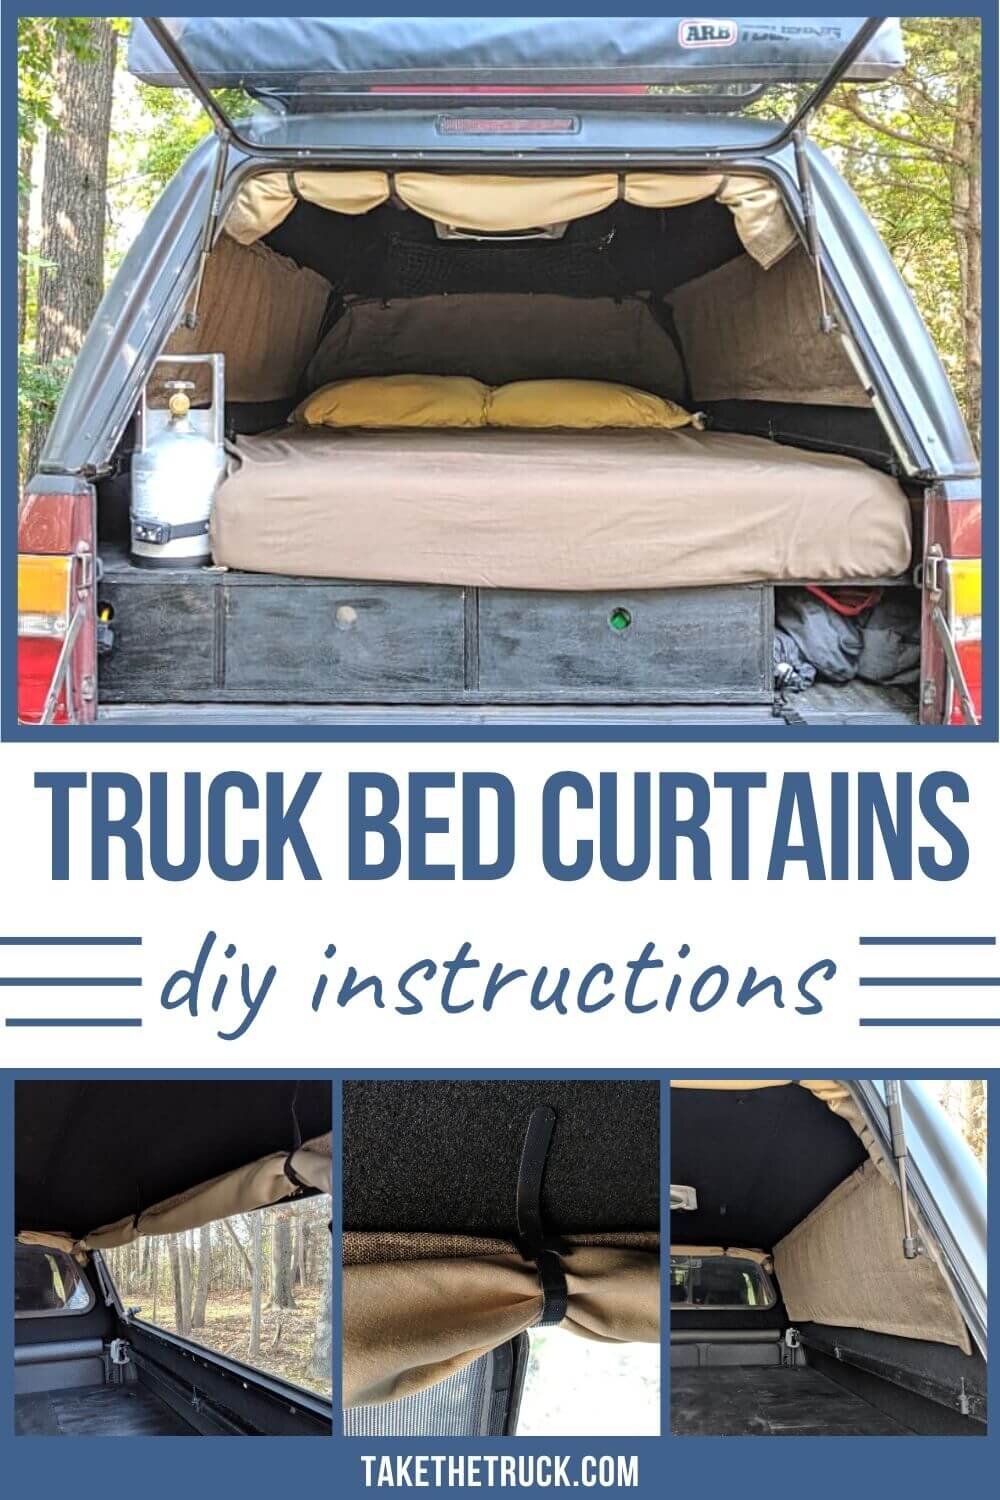 Step by step instructions for making truck bed curtains.